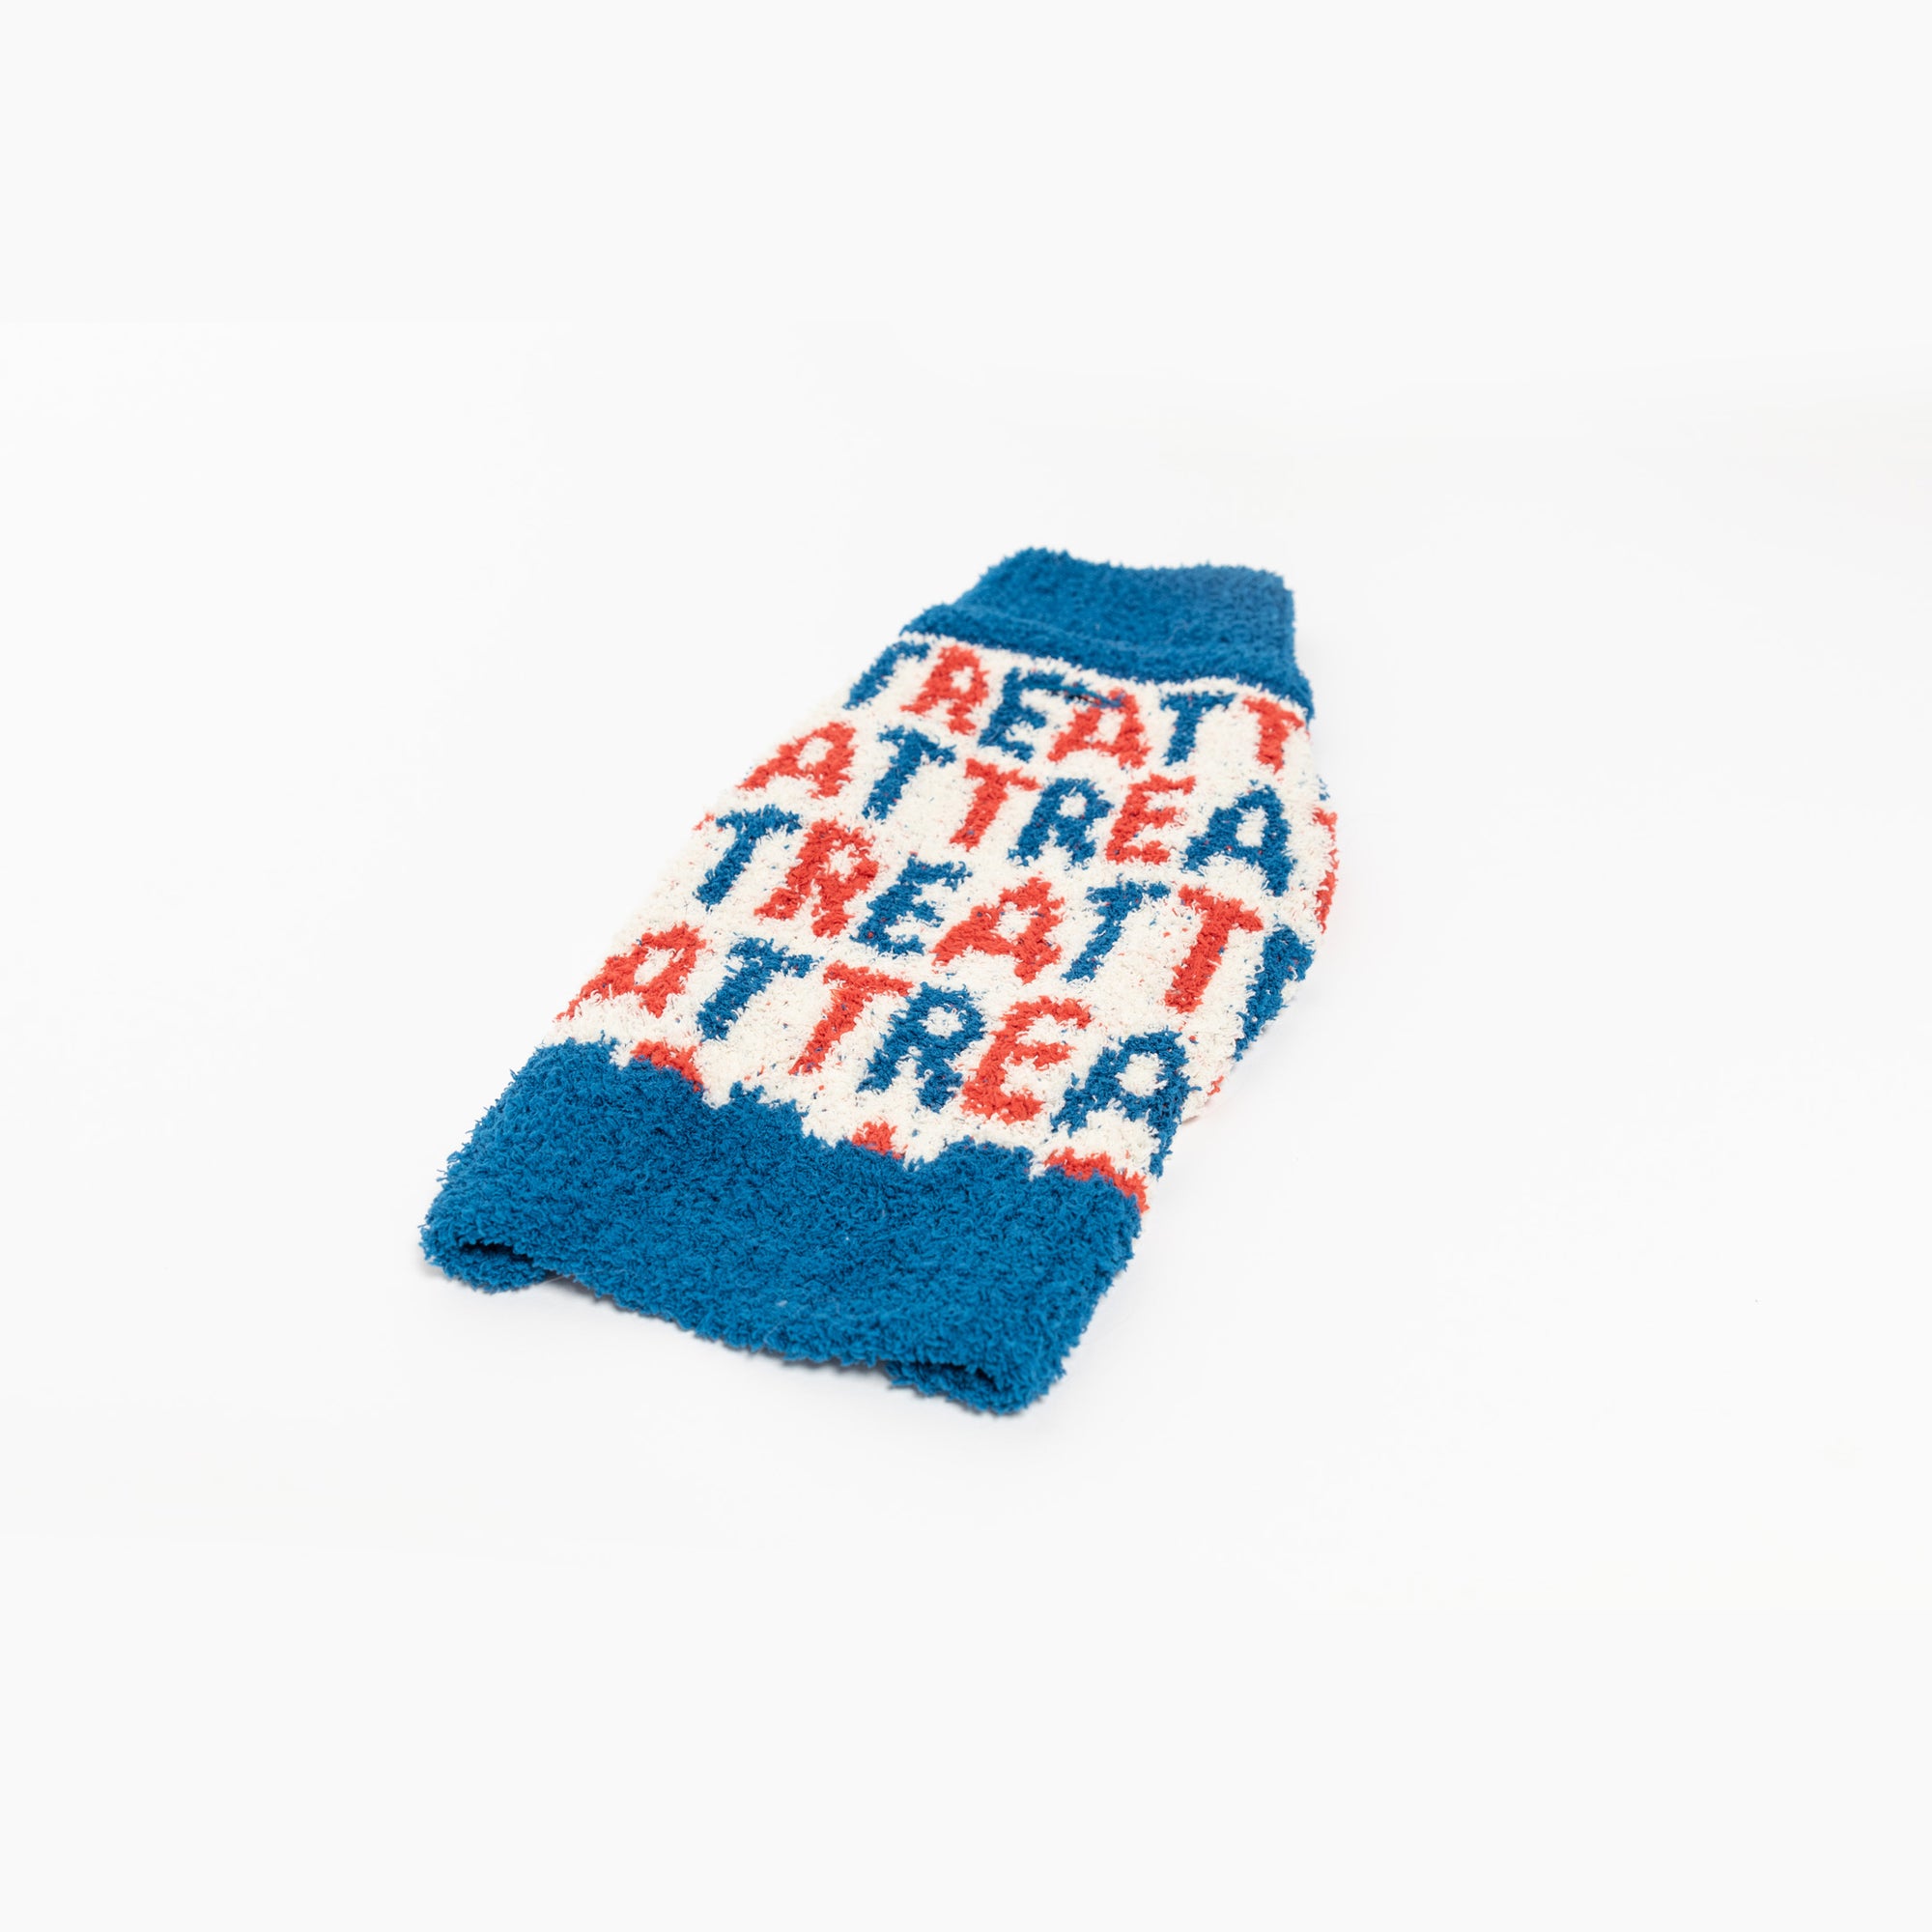  A vibrant blue dog sweater with a playful "Treat" pattern, designed to keep your furry friend warm and stylish.